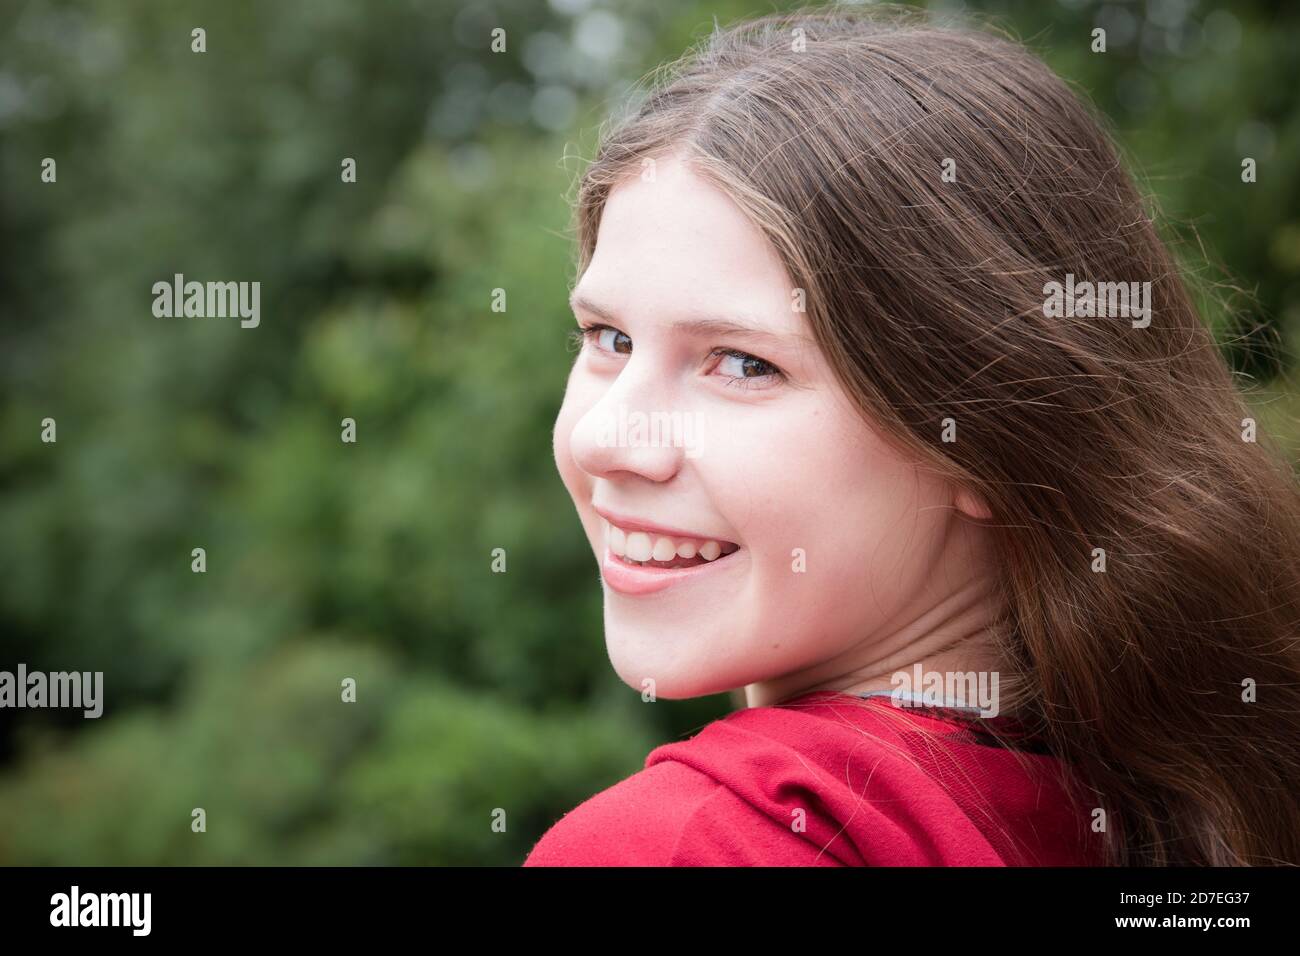 Beautiful natural portrait of teenage girl with long brown hair looking back at camera with smile showing teeth Stock Photo